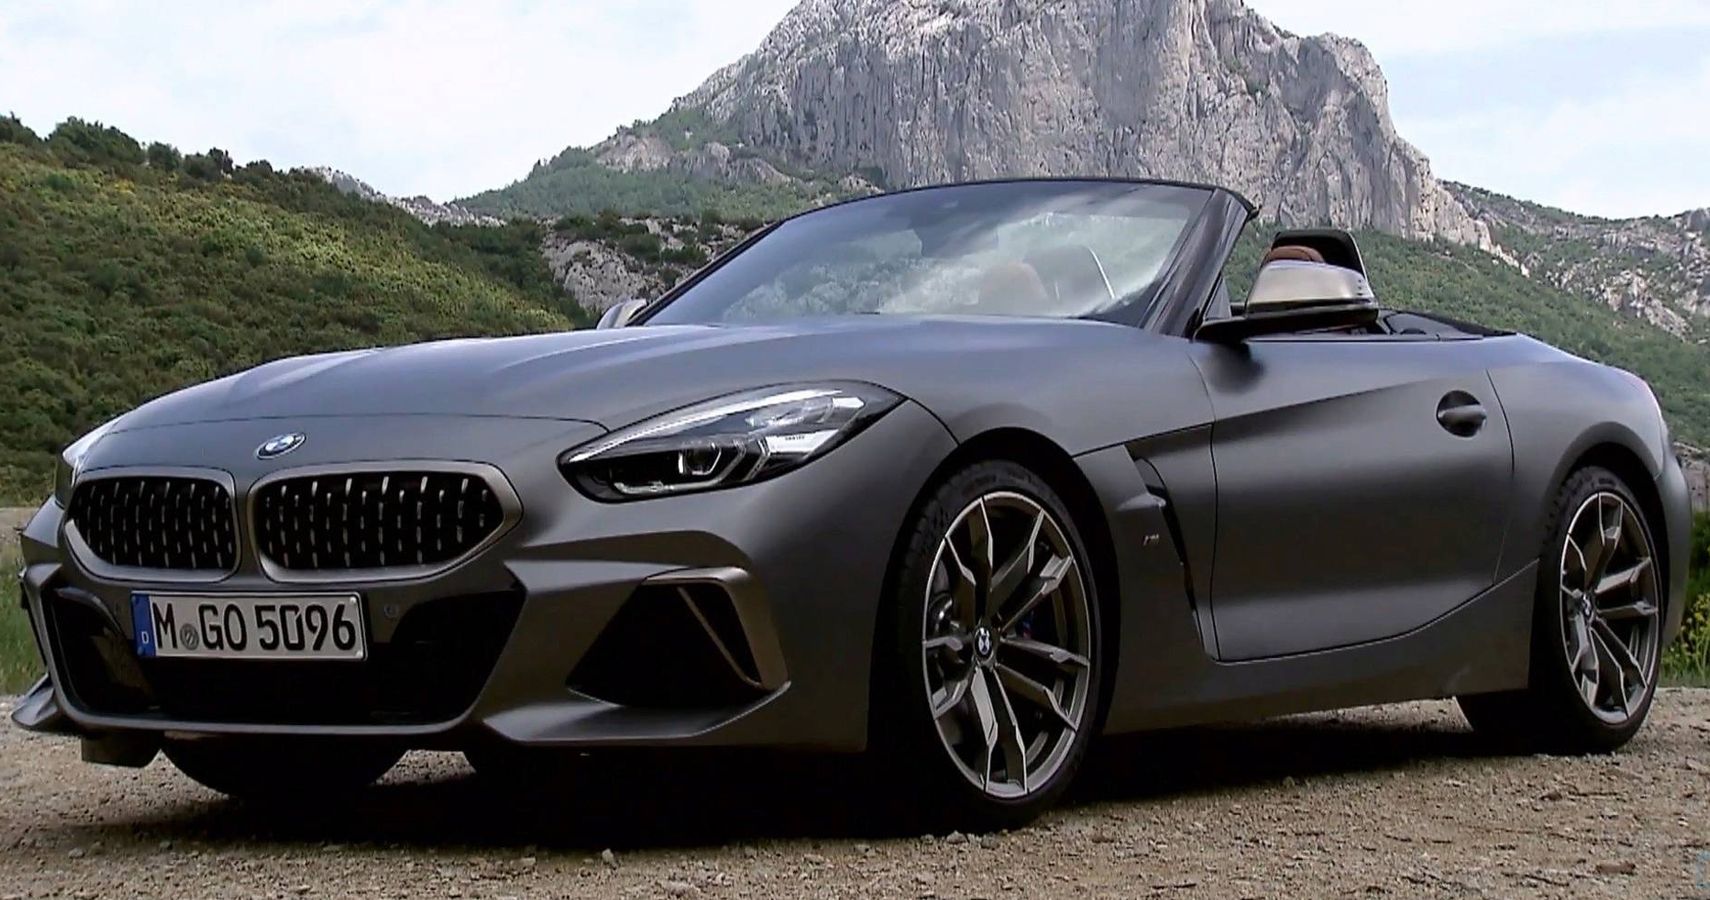 10 Of The Best BMW Car Models On The Market HotCars